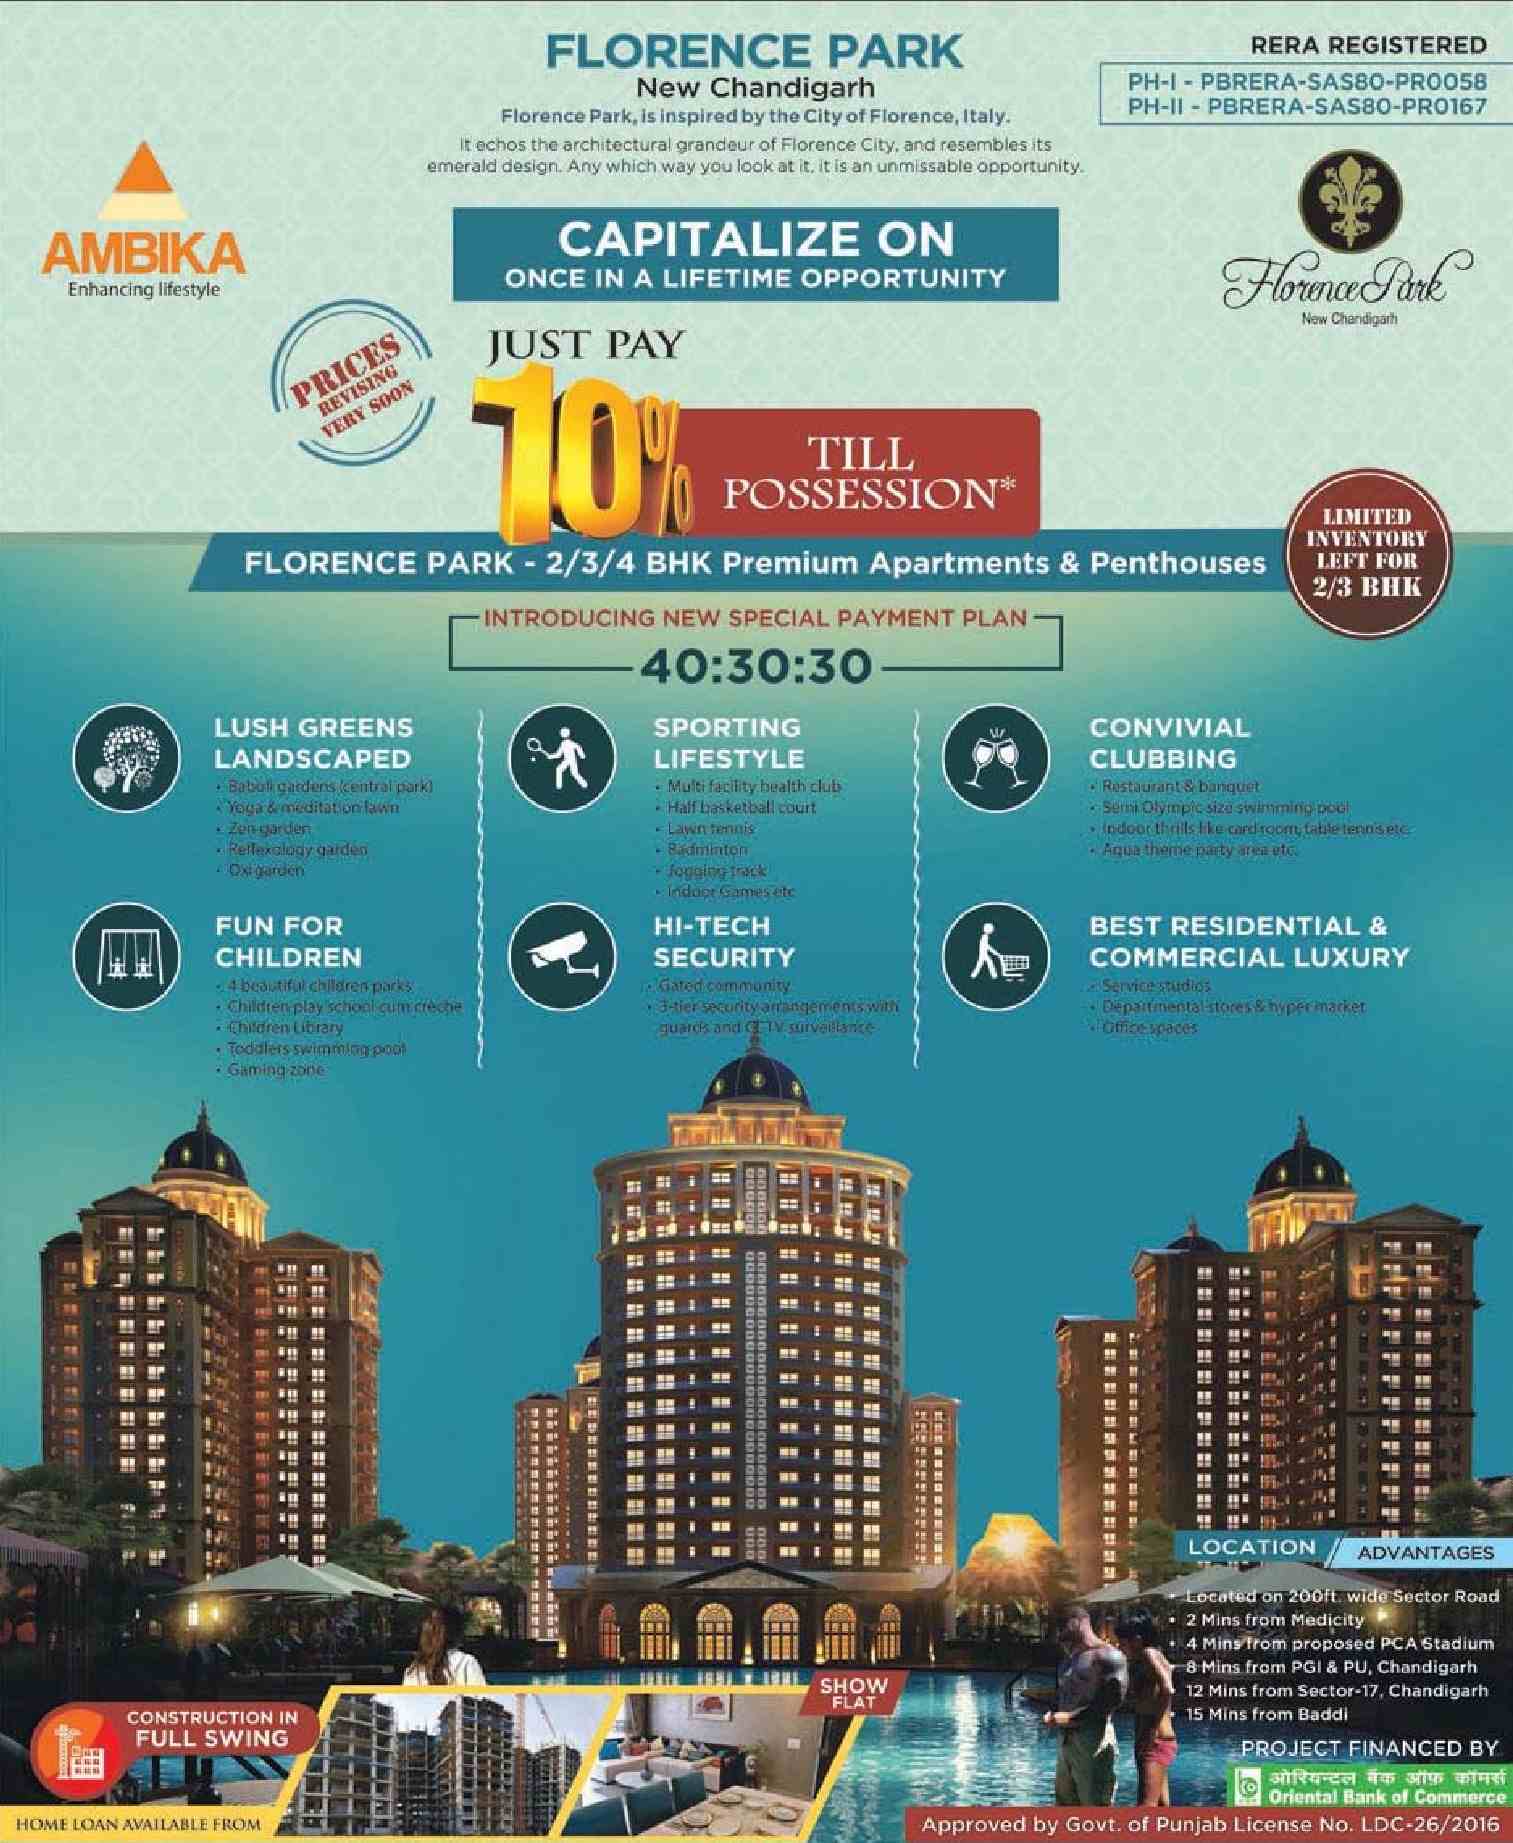 Just pay 10% till possession at Ambika Florence Park in Chandigarh